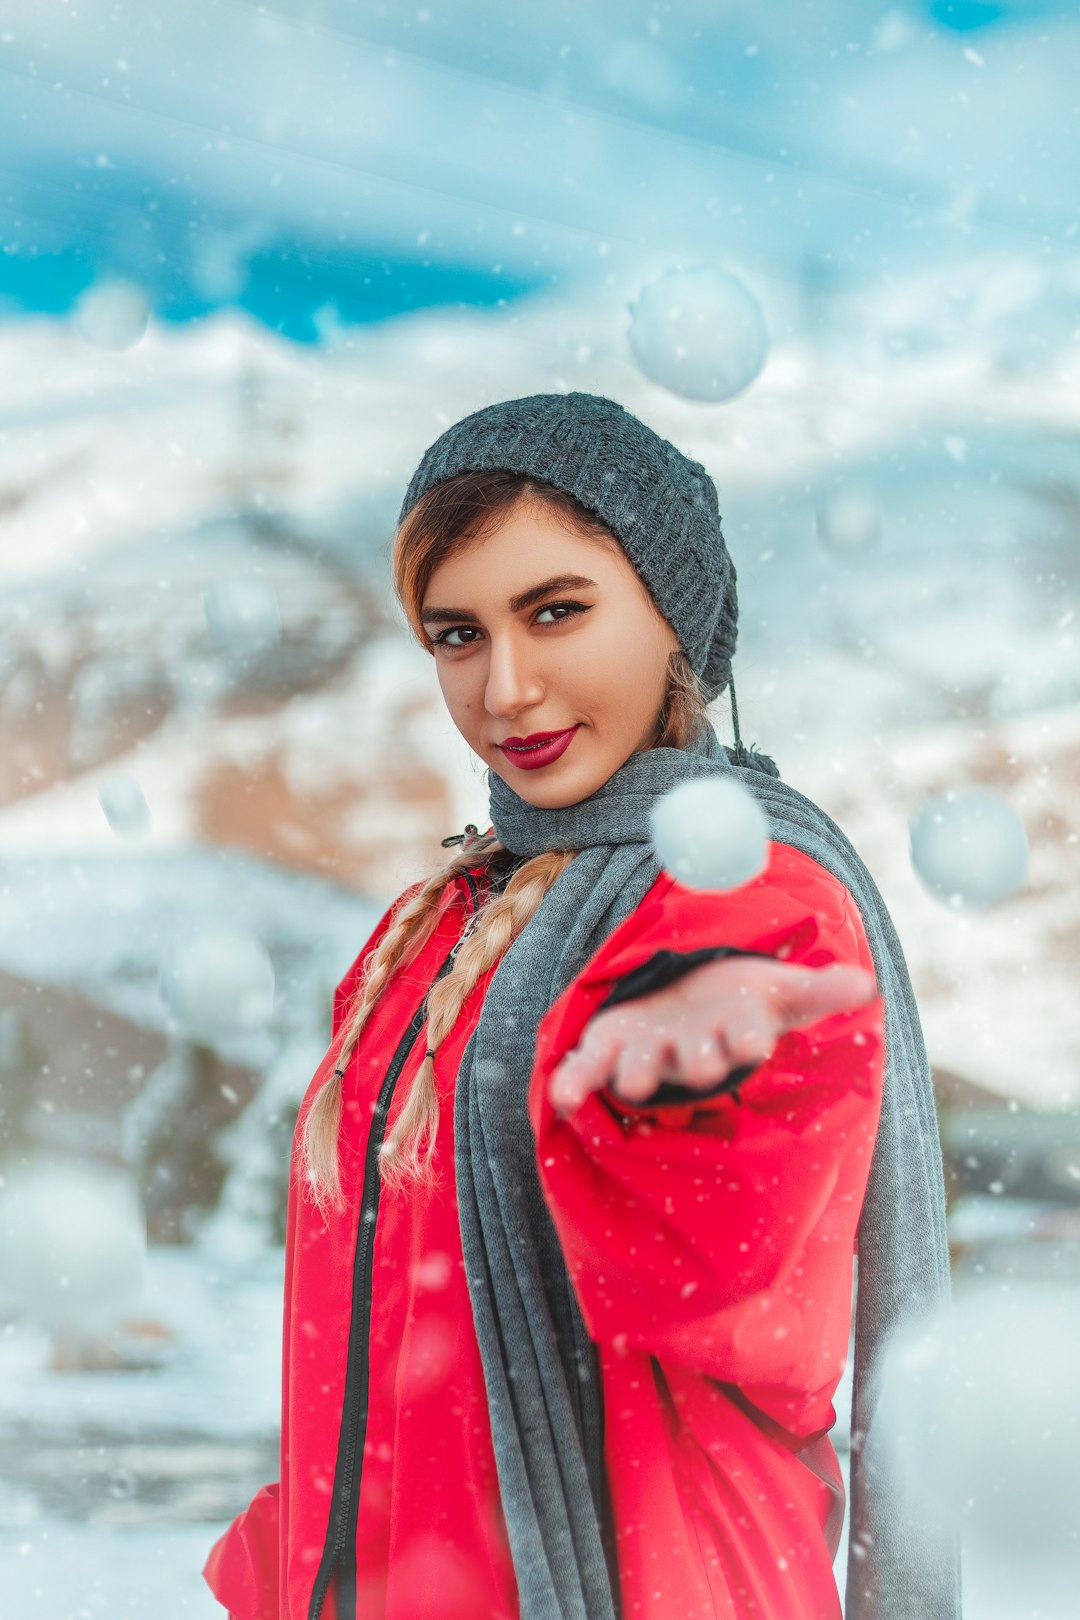 girl in red and black jacket and black knit cap